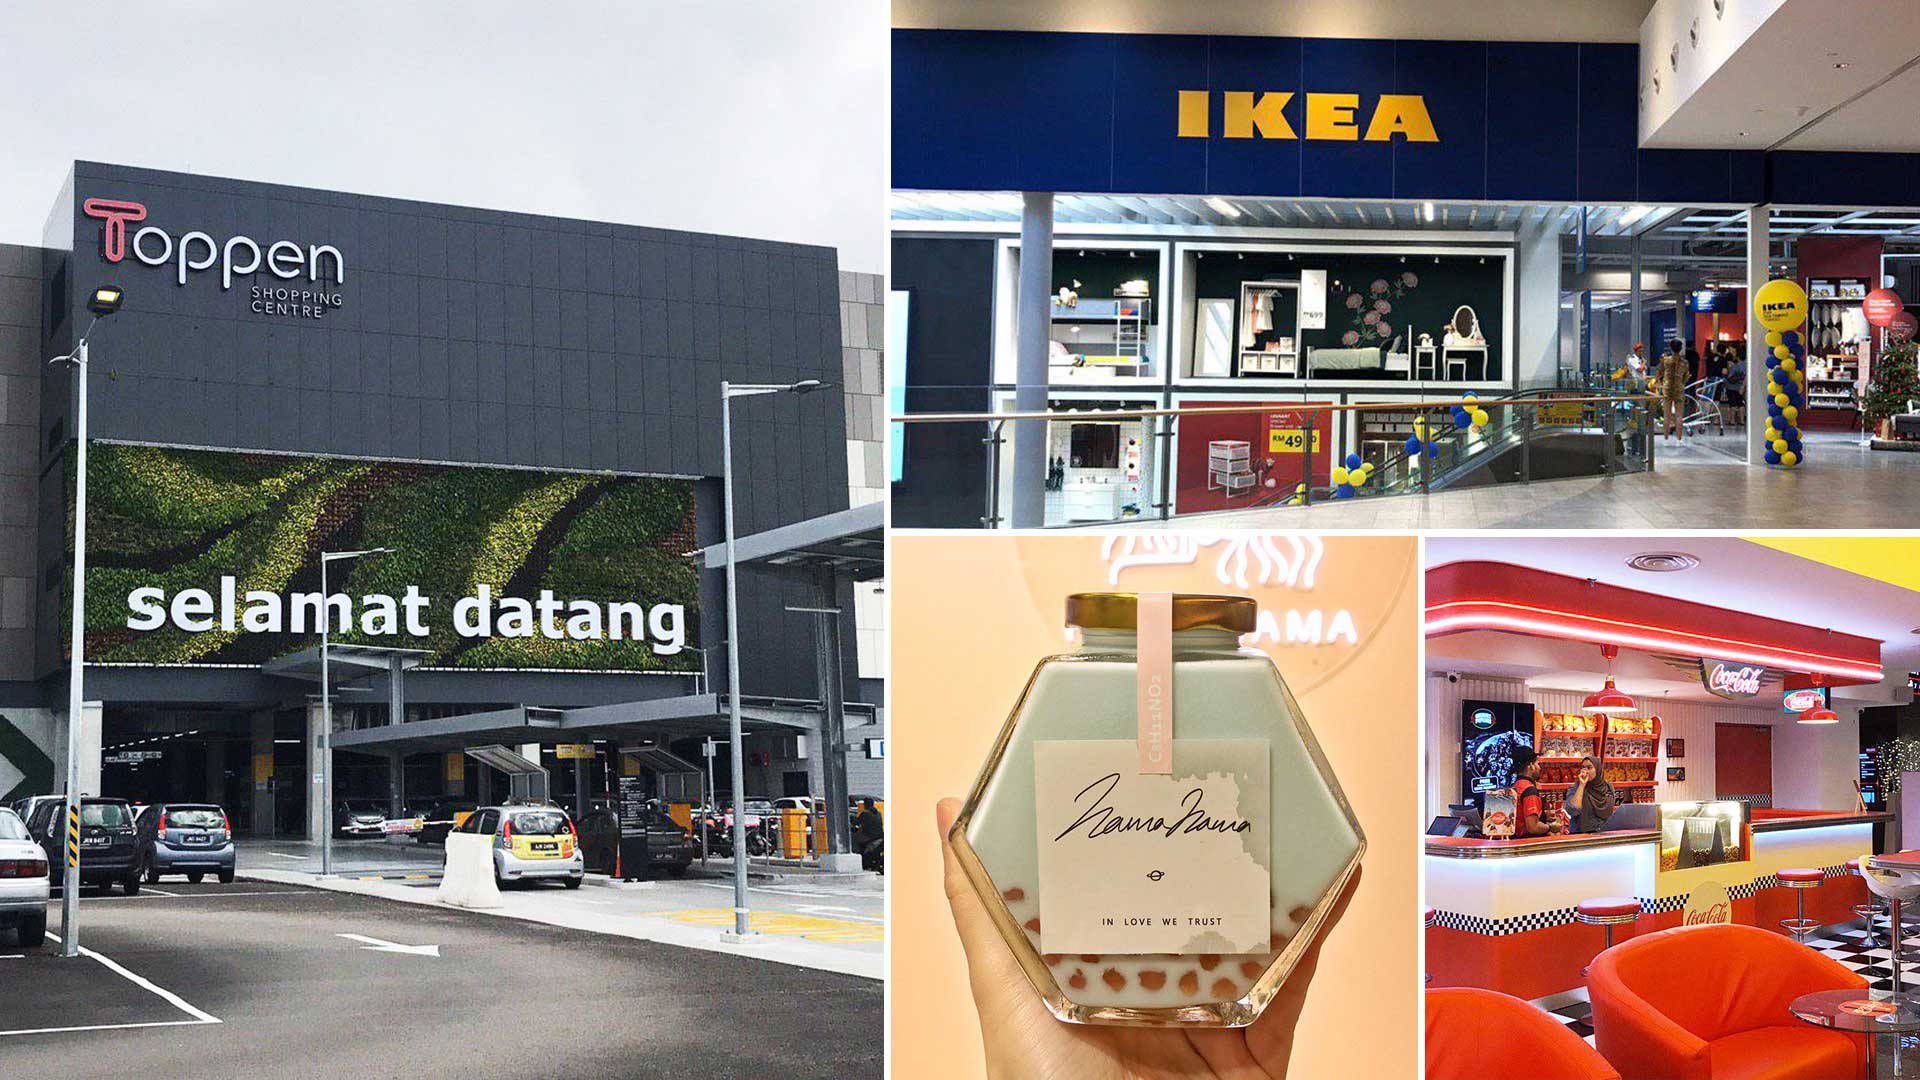 Massive Toppen Mall In Johor Bahru Has Ikea & Daiso Under One Roof